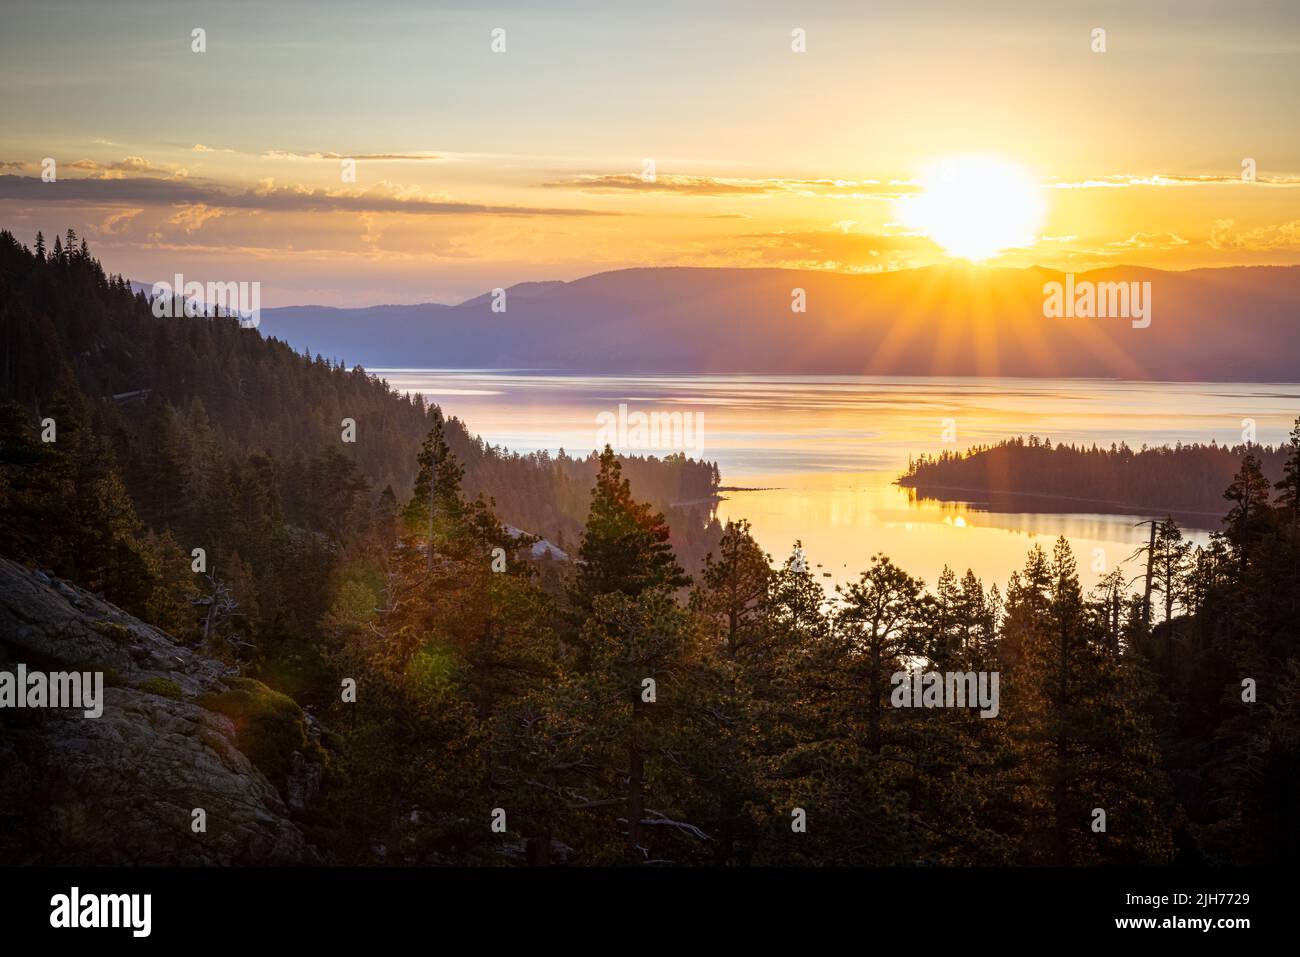 Just after sunrise on the Eagle Falls trail overlooking Emerald Bay Lake Tahoe Stock Photo